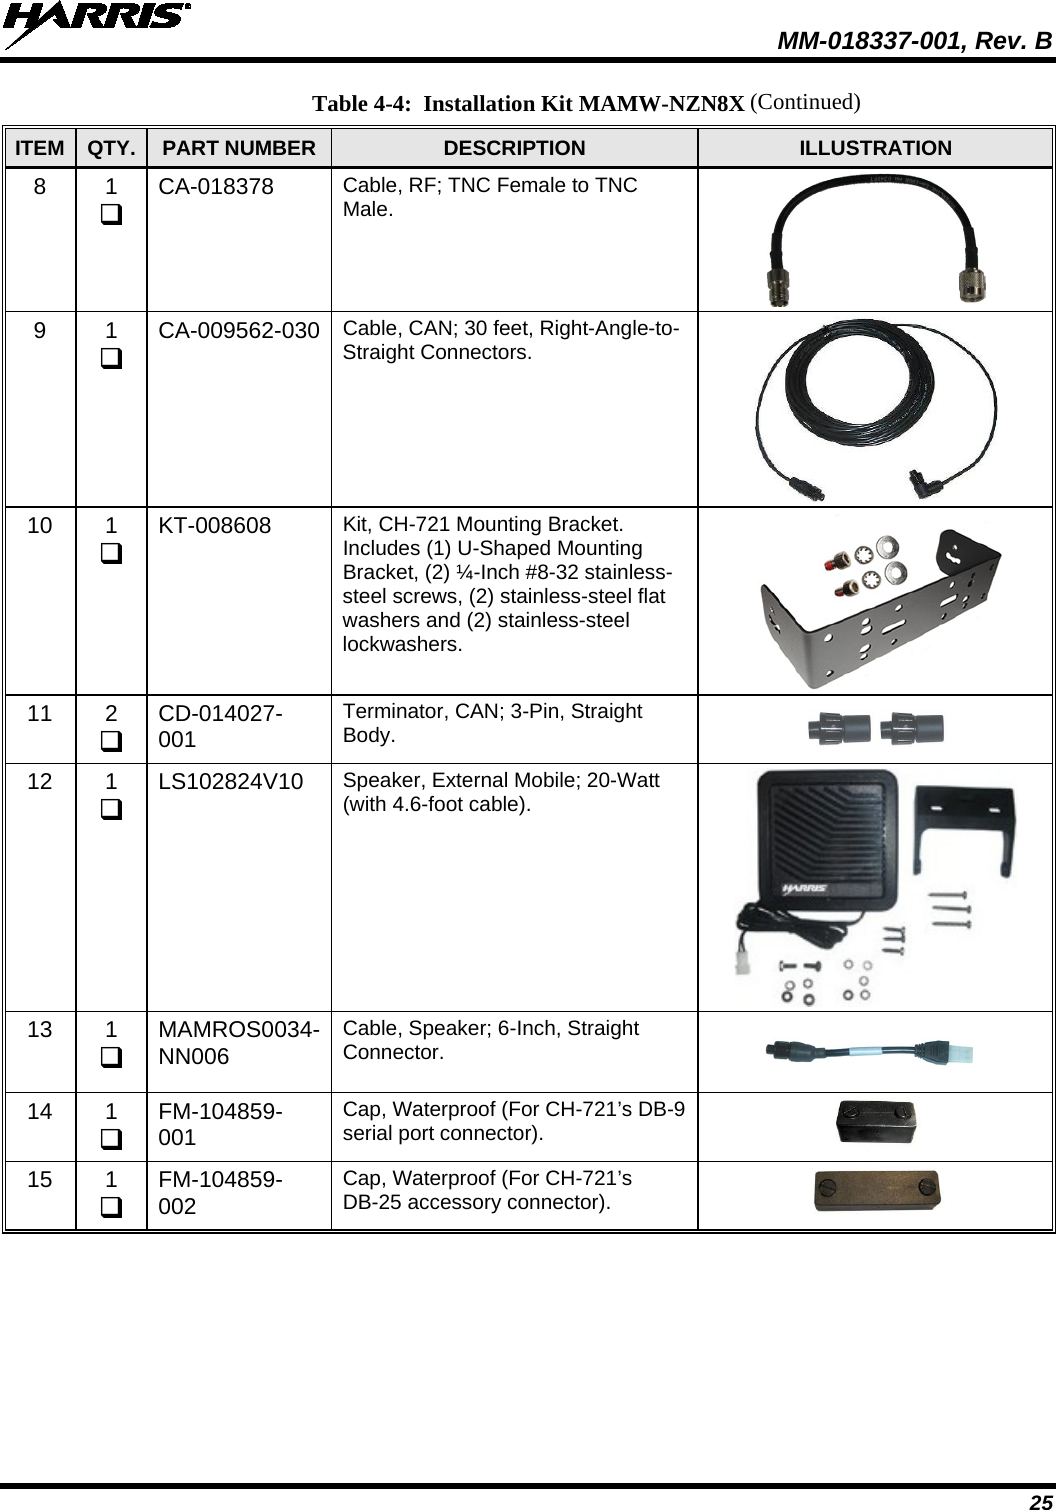  MM-018337-001, Rev. B 25 Table 4-4:  Installation Kit MAMW-NZN8X ITEM QTY. PART NUMBER DESCRIPTION  ILLUSTRATION 8  1  CA-018378 Cable, RF; TNC Female to TNC Male.  9  1  CA-009562-030 Cable, CAN; 30 feet, Right-Angle-to-Straight Connectors.  10  1  KT-008608 Kit, CH-721 Mounting Bracket. Includes (1) U-Shaped Mounting Bracket, (2) ¼-Inch #8-32 stainless-steel screws, (2) stainless-steel flat washers and (2) stainless-steel lockwashers.  11  2  CD-014027-001 Terminator, CAN; 3-Pin, Straight Body.   12  1  LS102824V10 Speaker, External Mobile; 20-Watt (with 4.6-foot cable).  13  1  MAMROS0034-NN006 Cable, Speaker; 6-Inch, Straight Connector.  14  1  FM-104859-001 Cap, Waterproof (For CH-721’s DB-9 serial port connector).  15  1  FM-104859-002 Cap, Waterproof (For CH-721’s DB-25 accessory connector).   (Continued) 